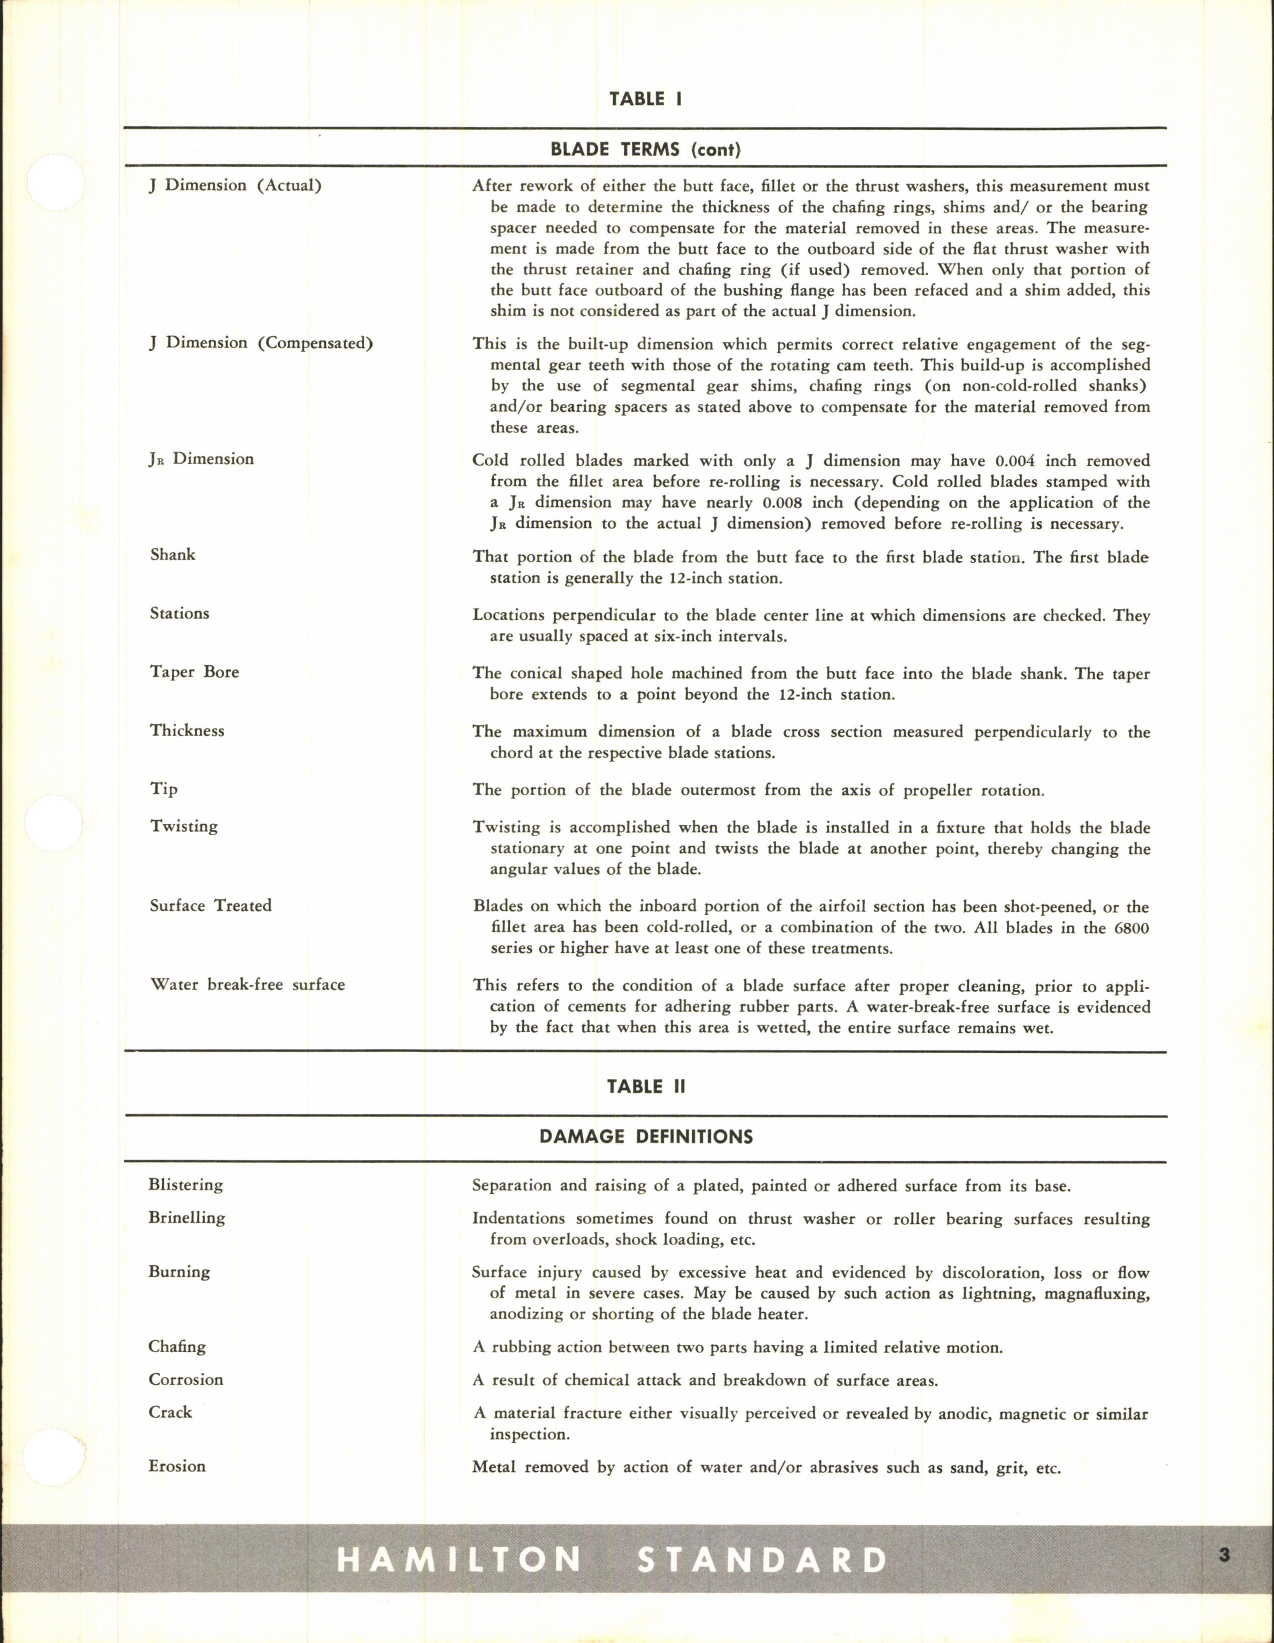 Sample page 23 from AirCorps Library document: Aluminum Blade Overhaul Manual for Hamilton Standard Propellers